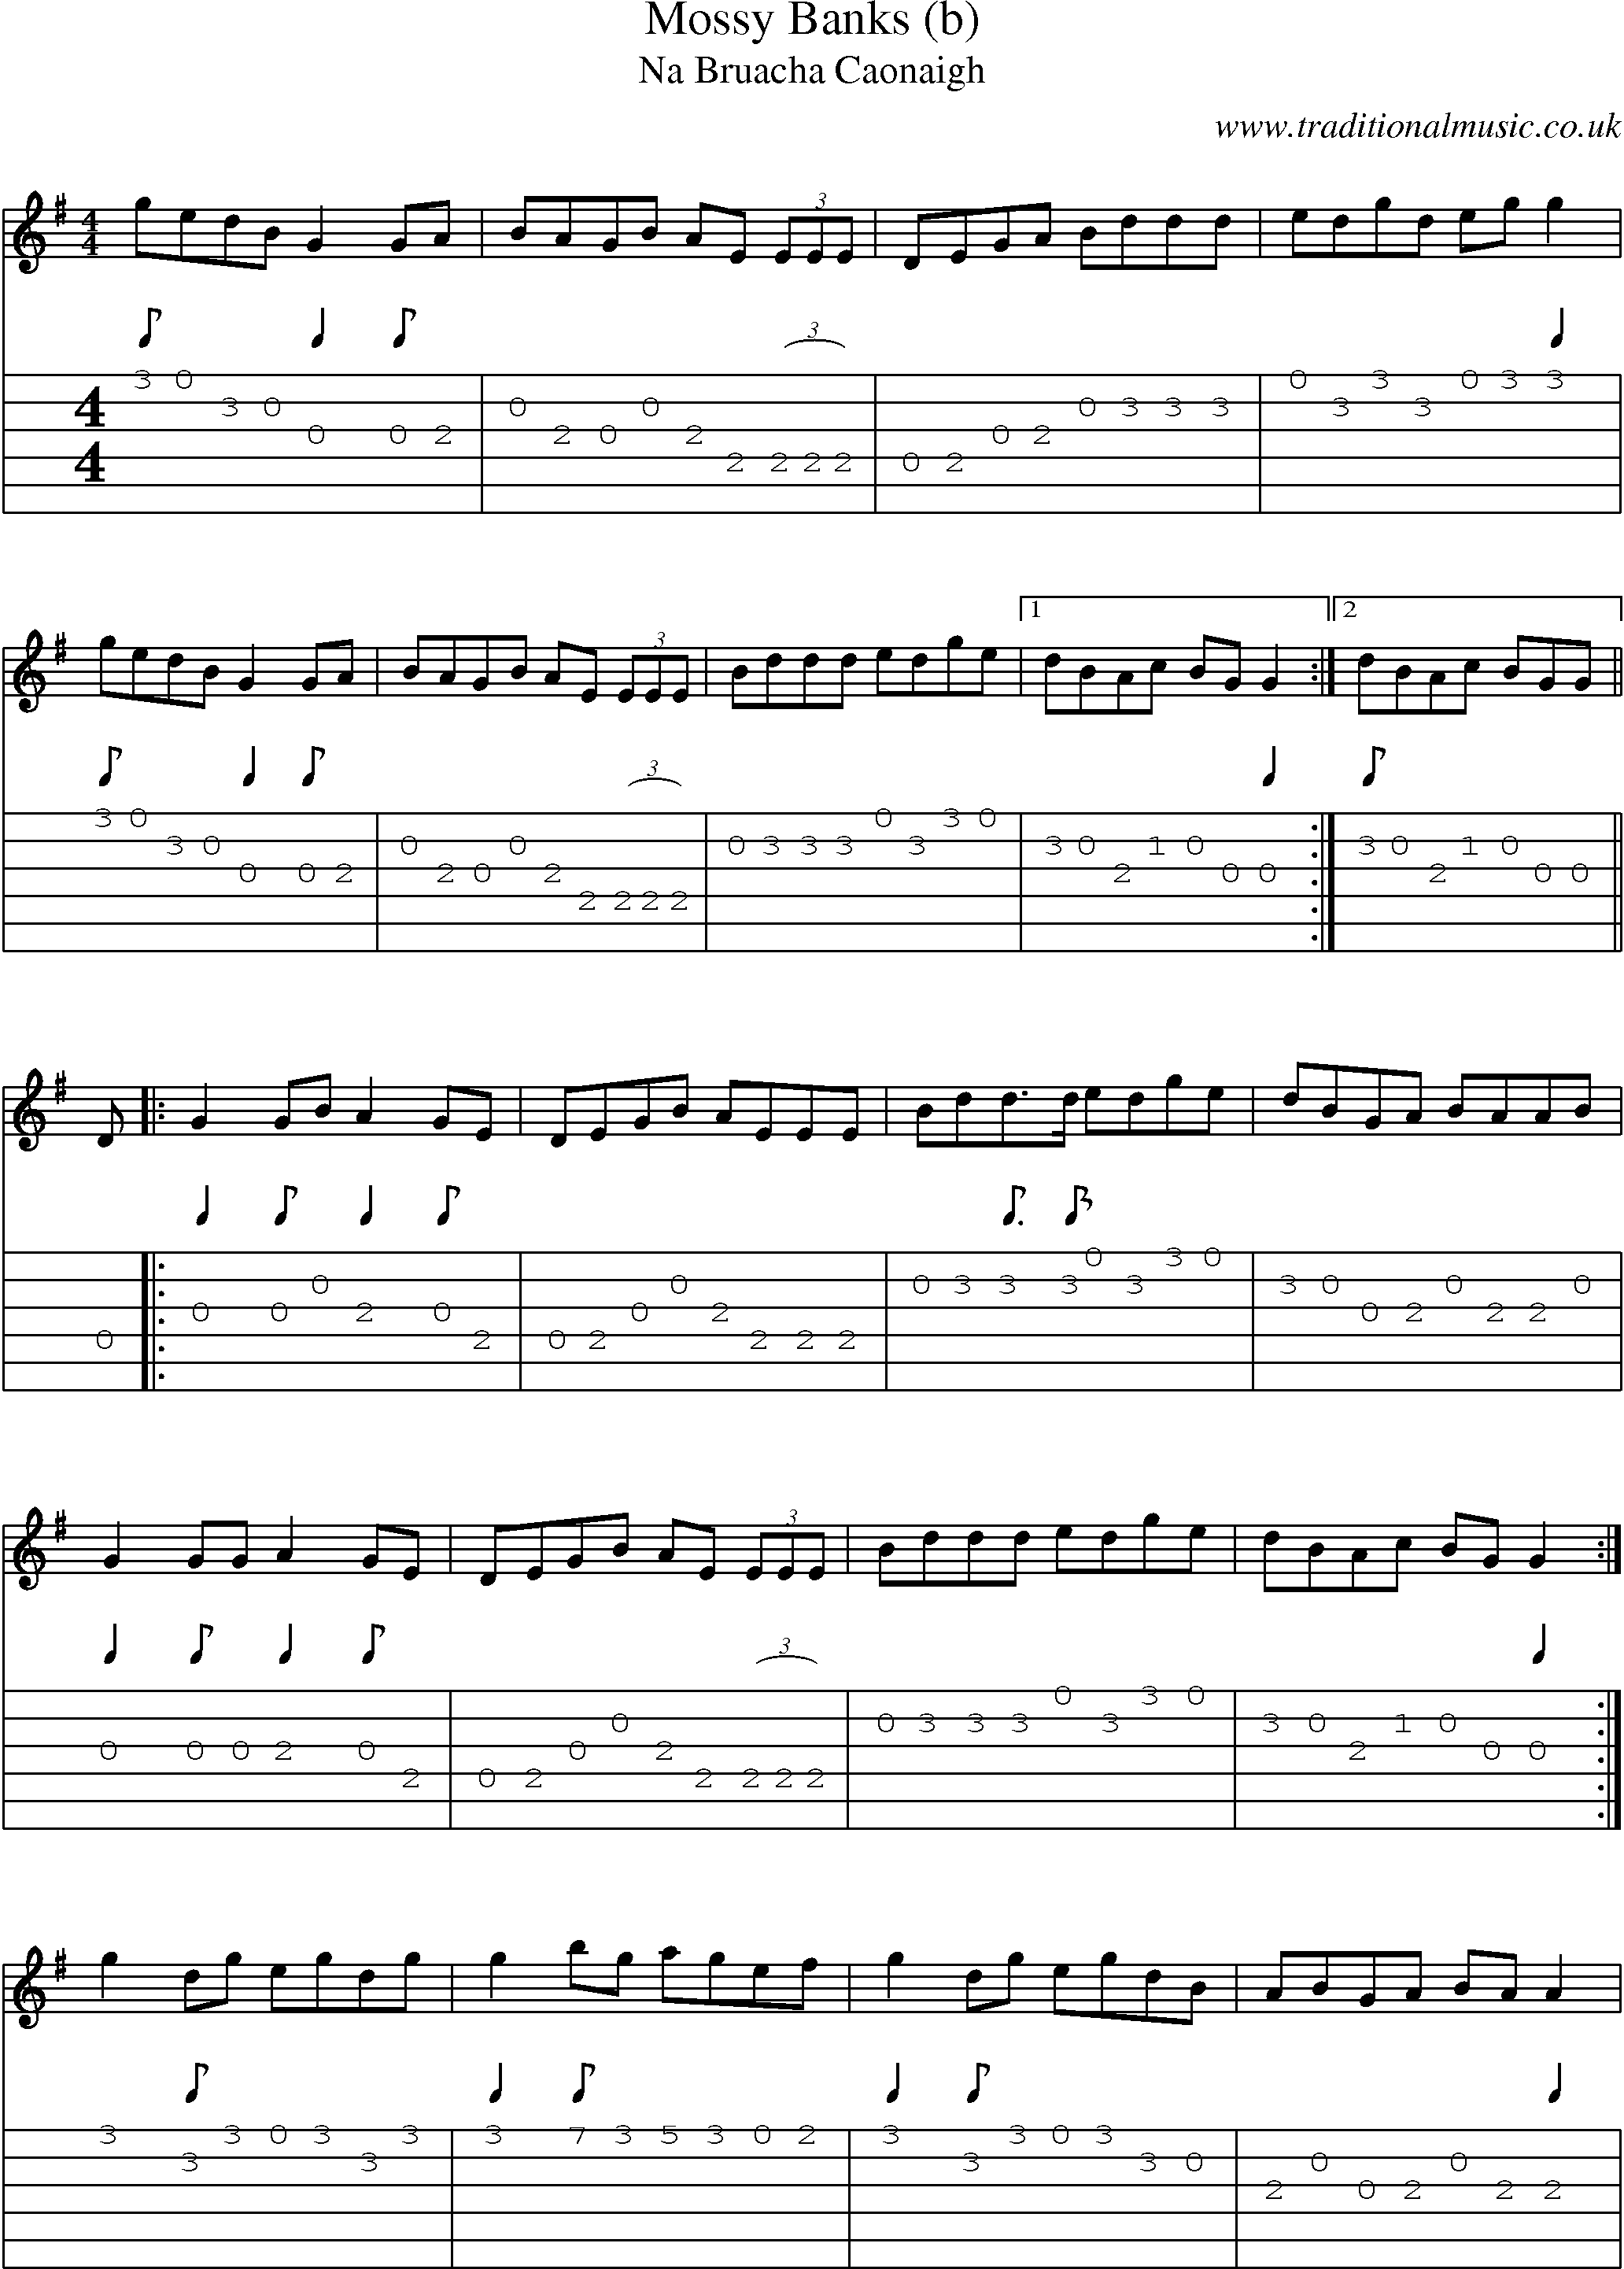 Music Score and Guitar Tabs for Mossy Banks (b)